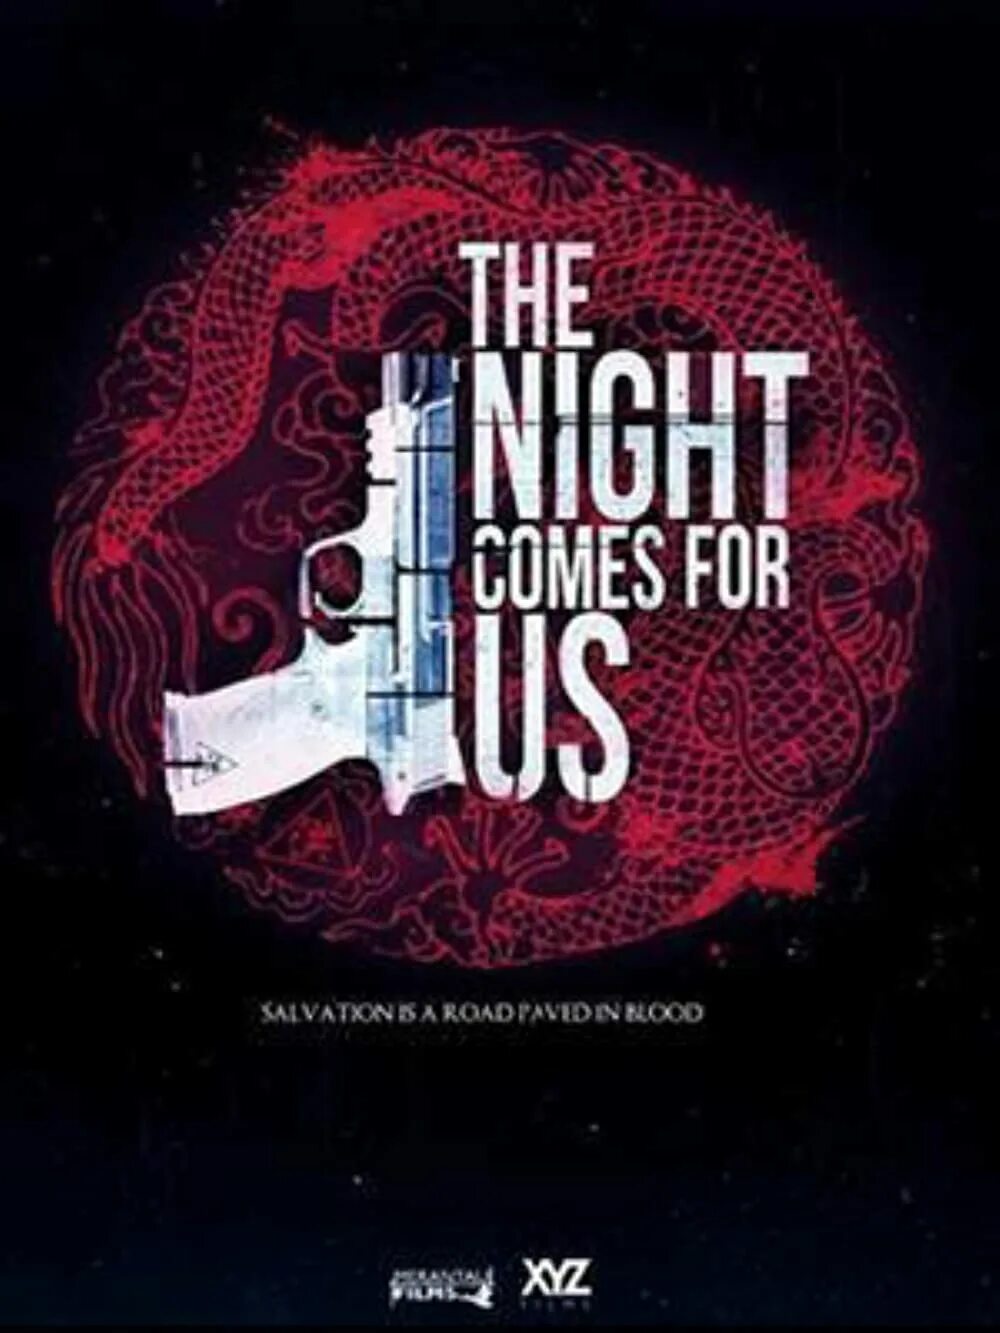 He comes in the night. The Night comes for us 2018. The Night comes for us poster. The Night comes for us, 2018 poster. Night coming.